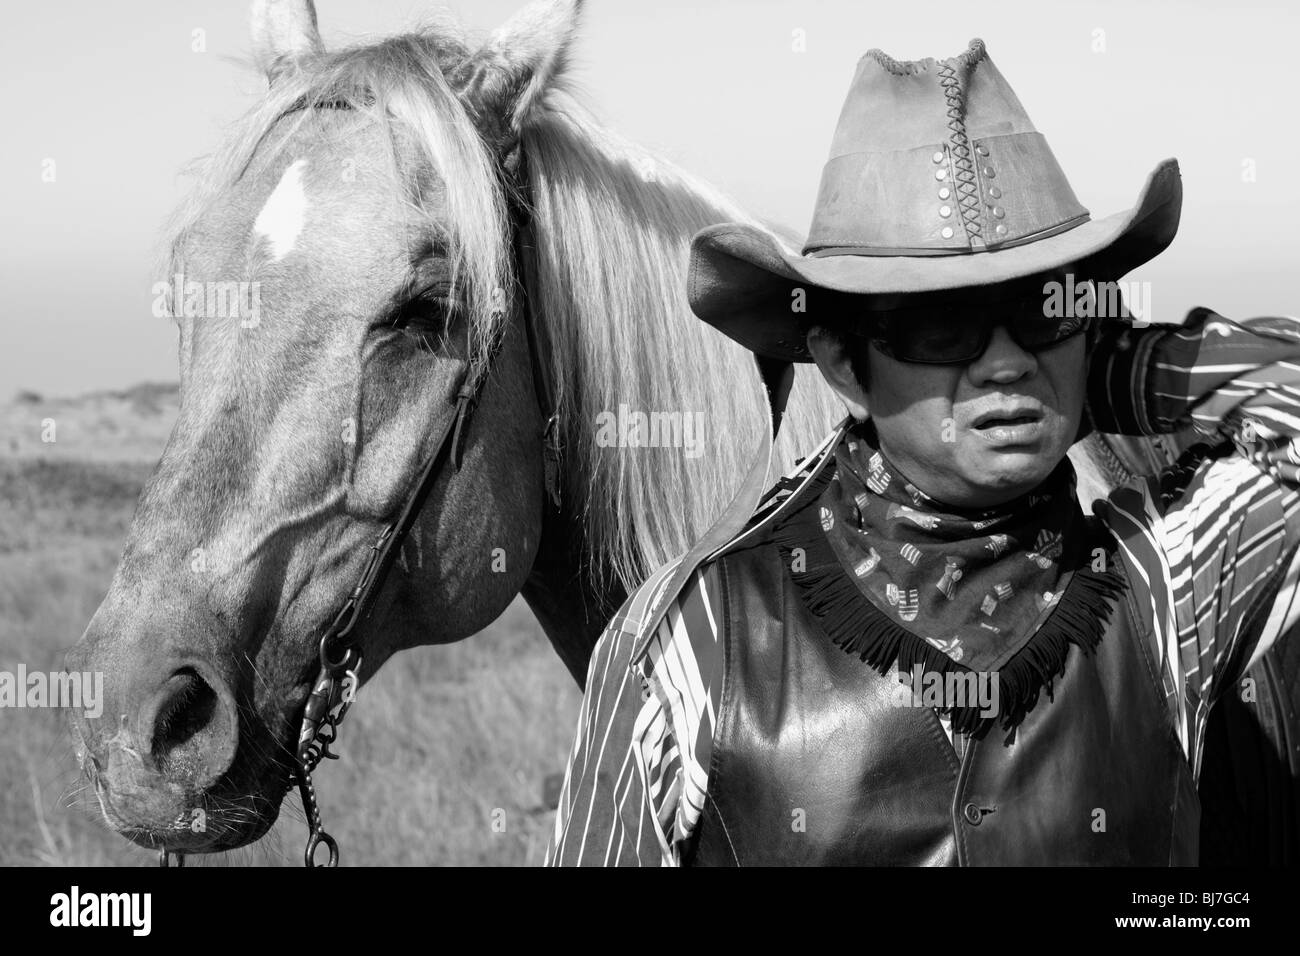 A horse rider looking confused next to his horse his horse. Stock Photo